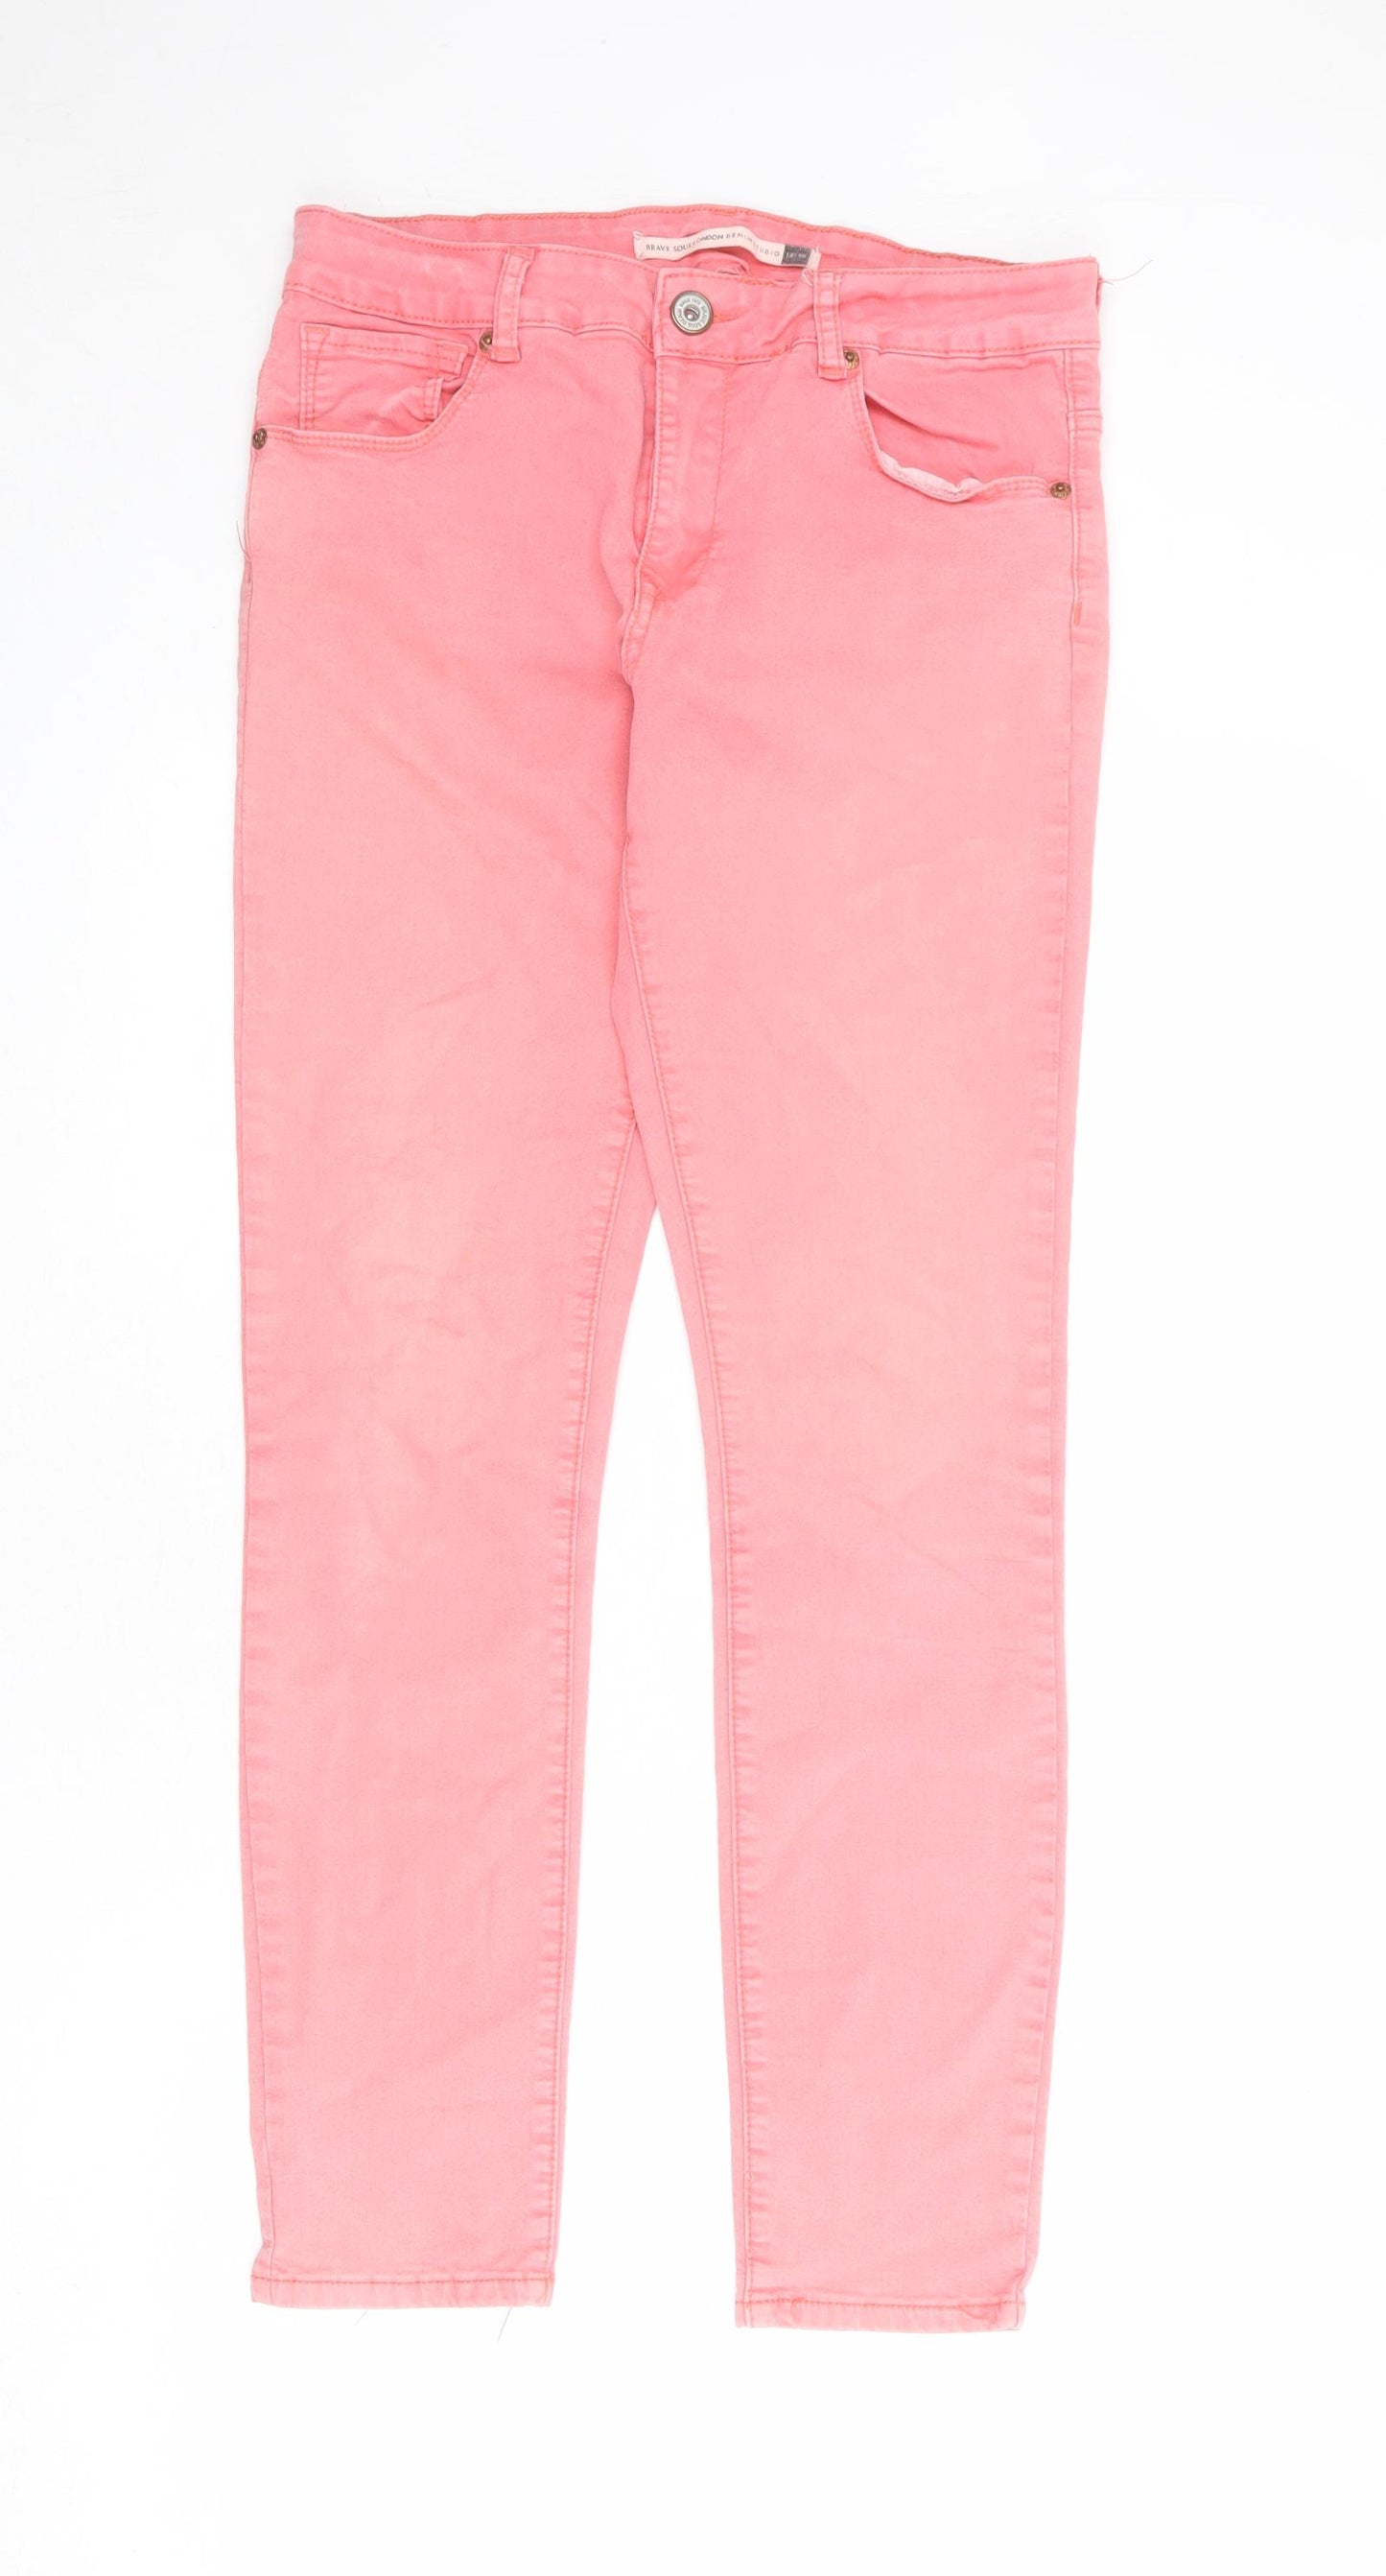 Brave Soul Womens Pink Cotton Skinny Jeans Size 12 L27 in Regular Zip